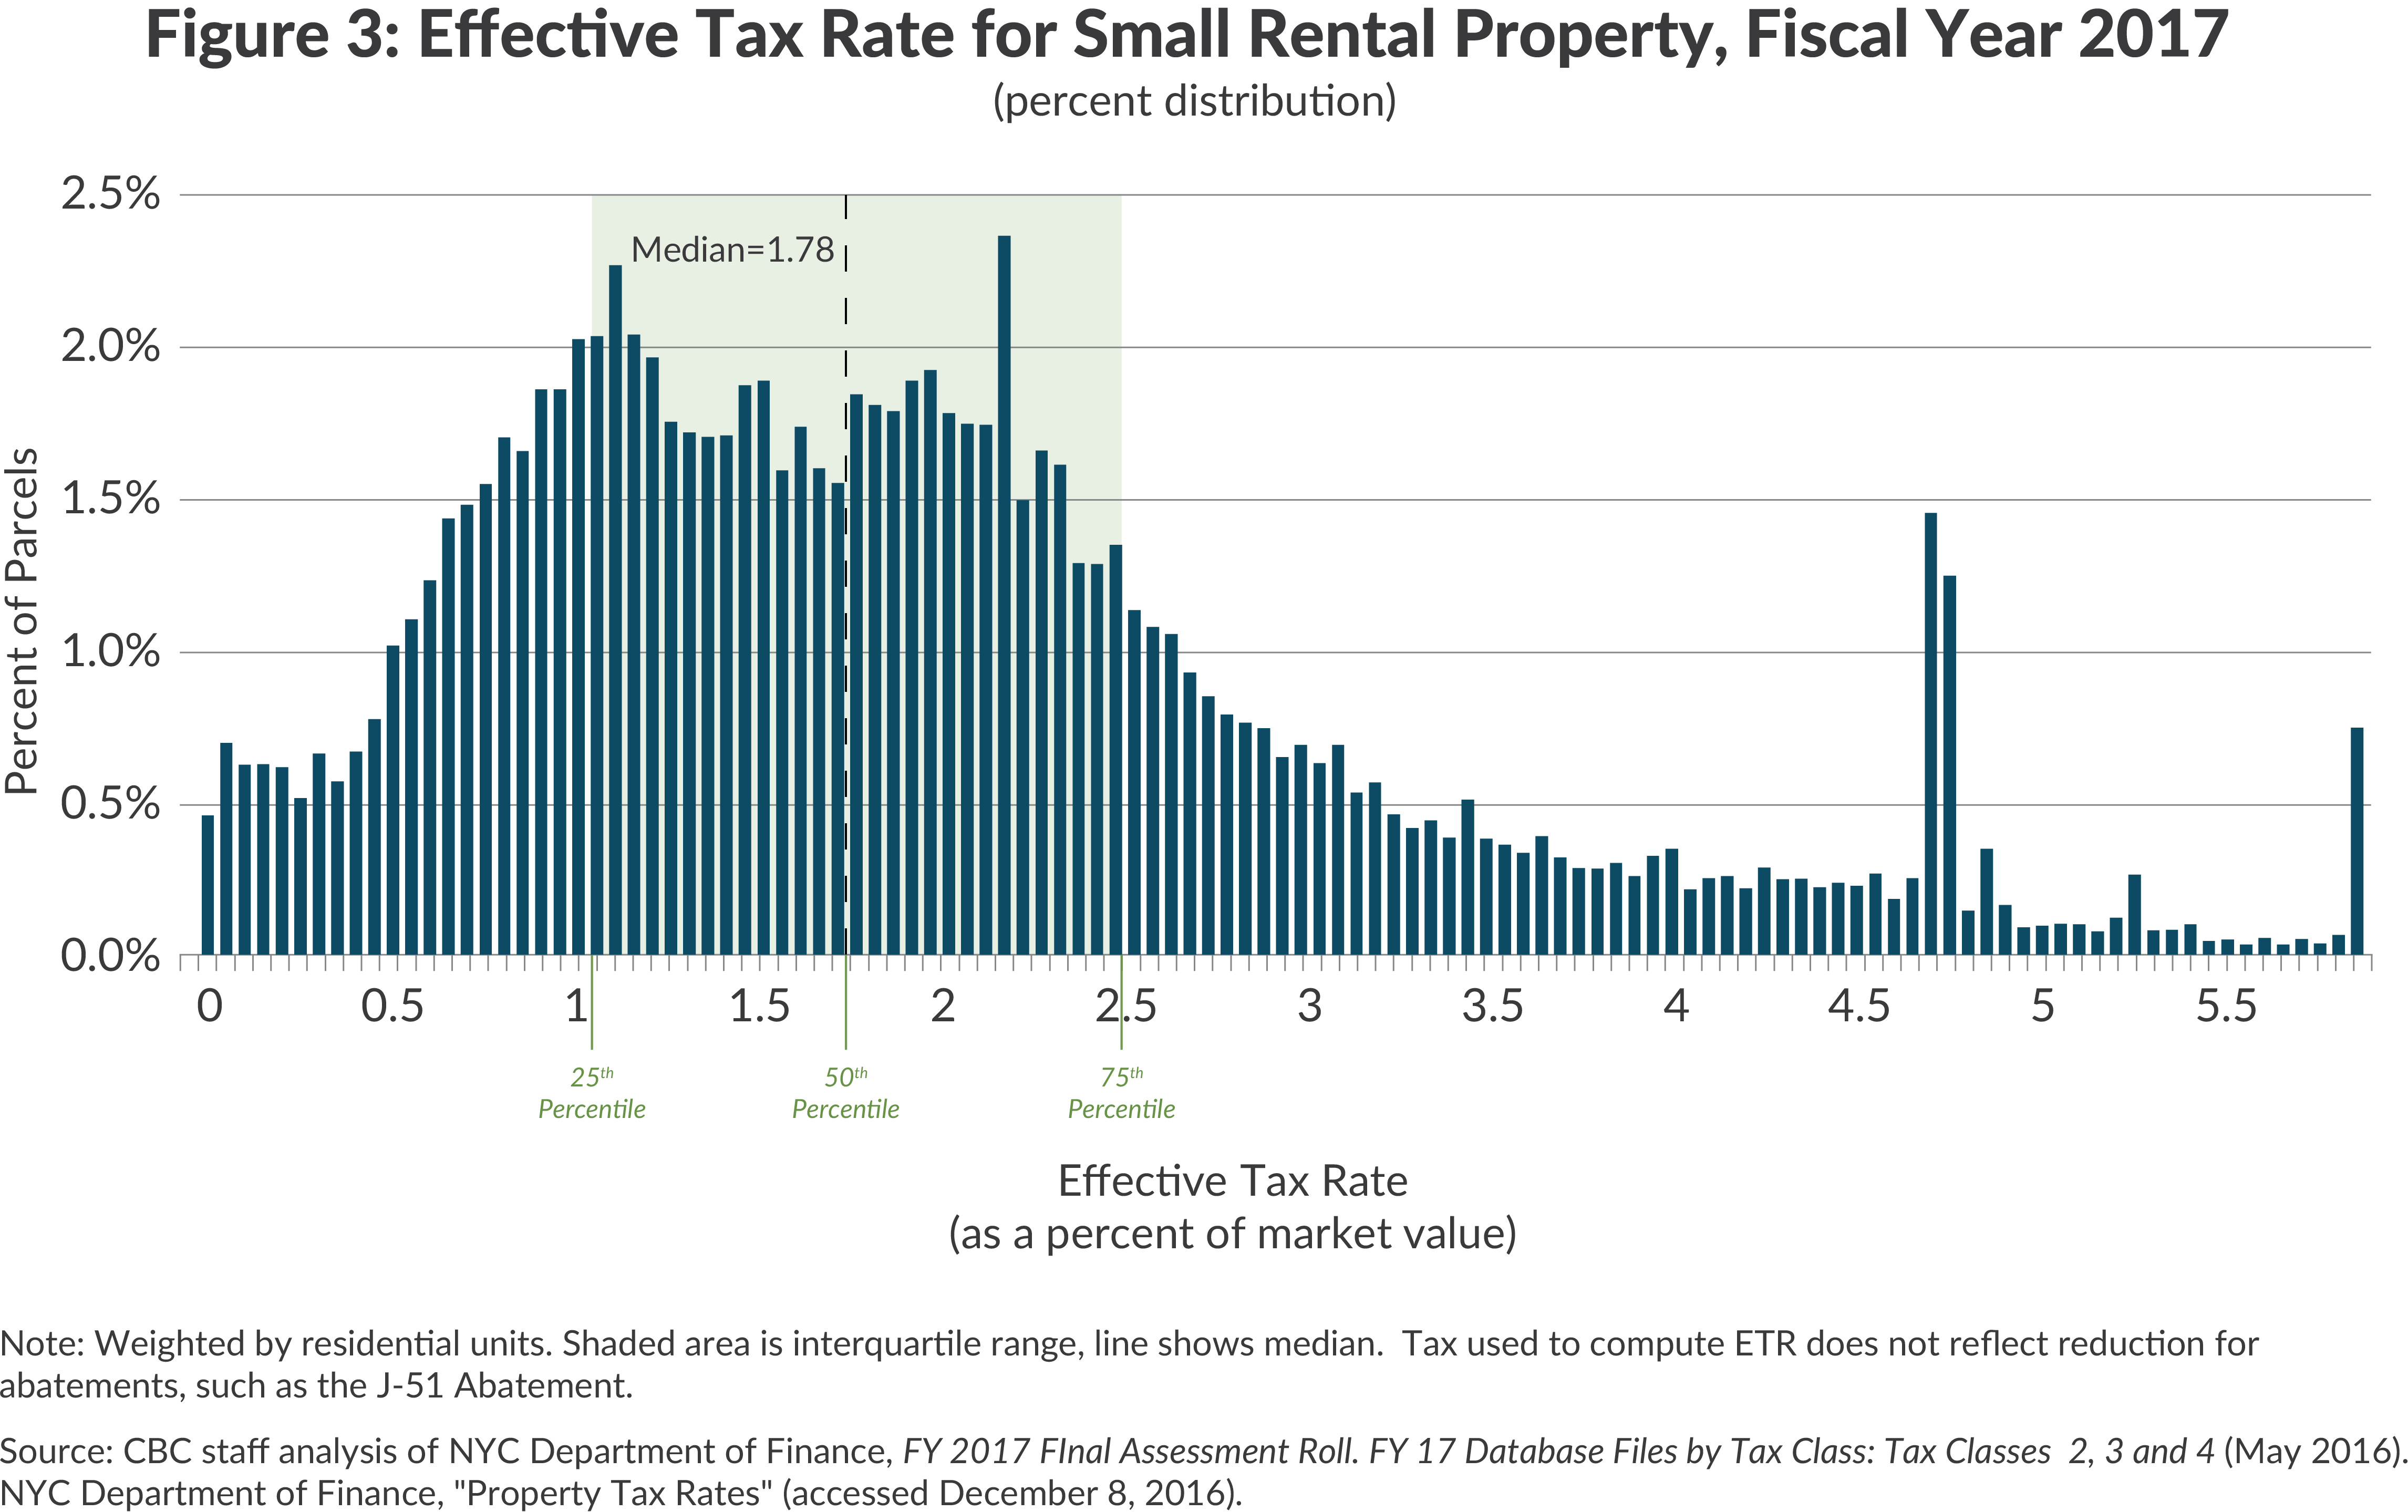 Effective tax rate distribution, NYC small rental property